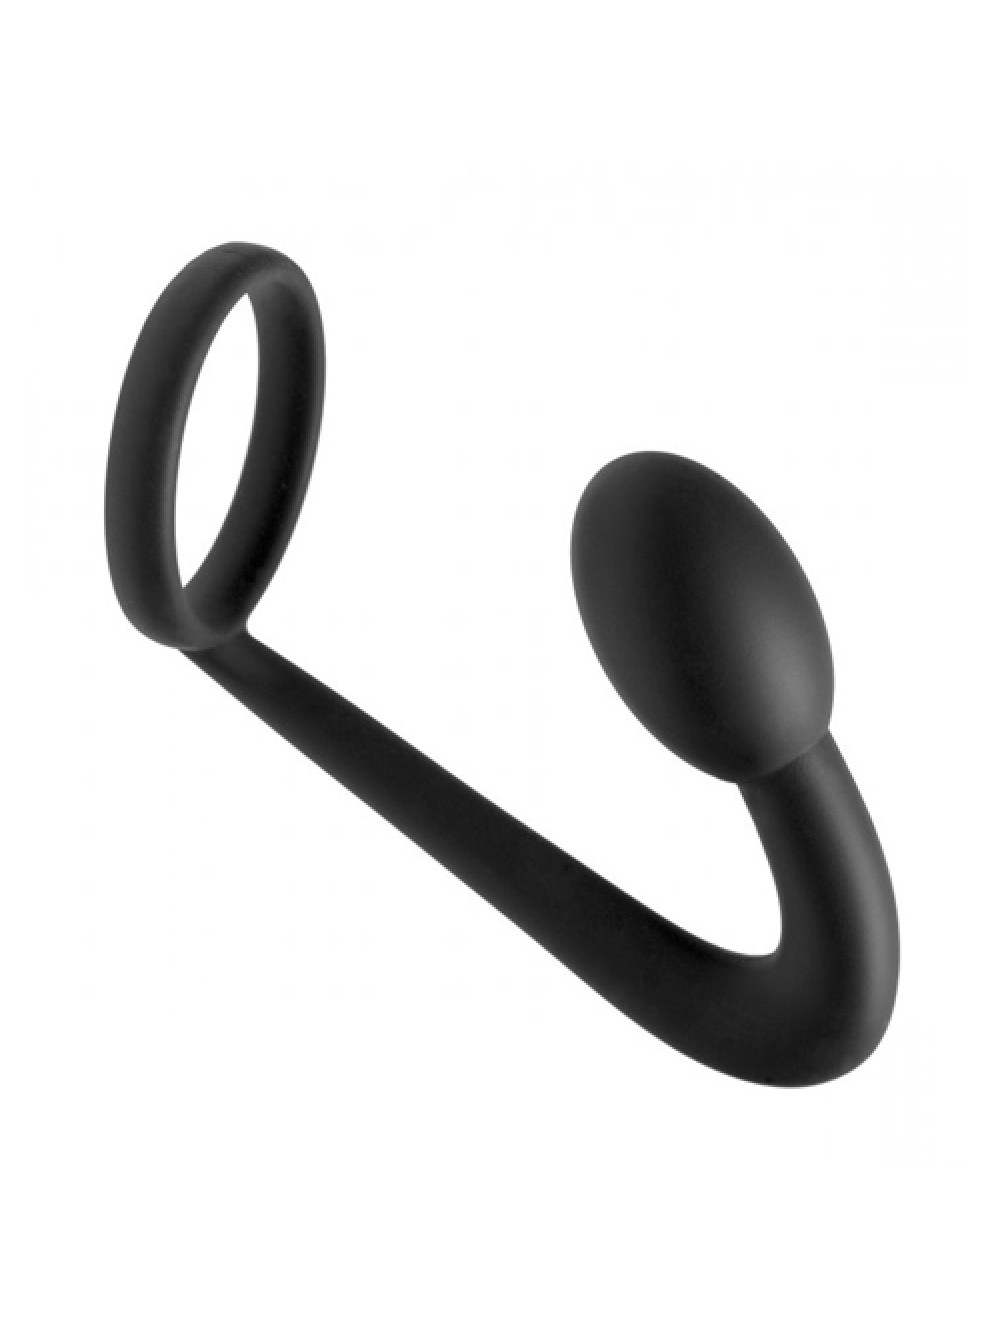 Prostatic Play Explorer Silicone Cock Ring and Prostate Plug 848518018878